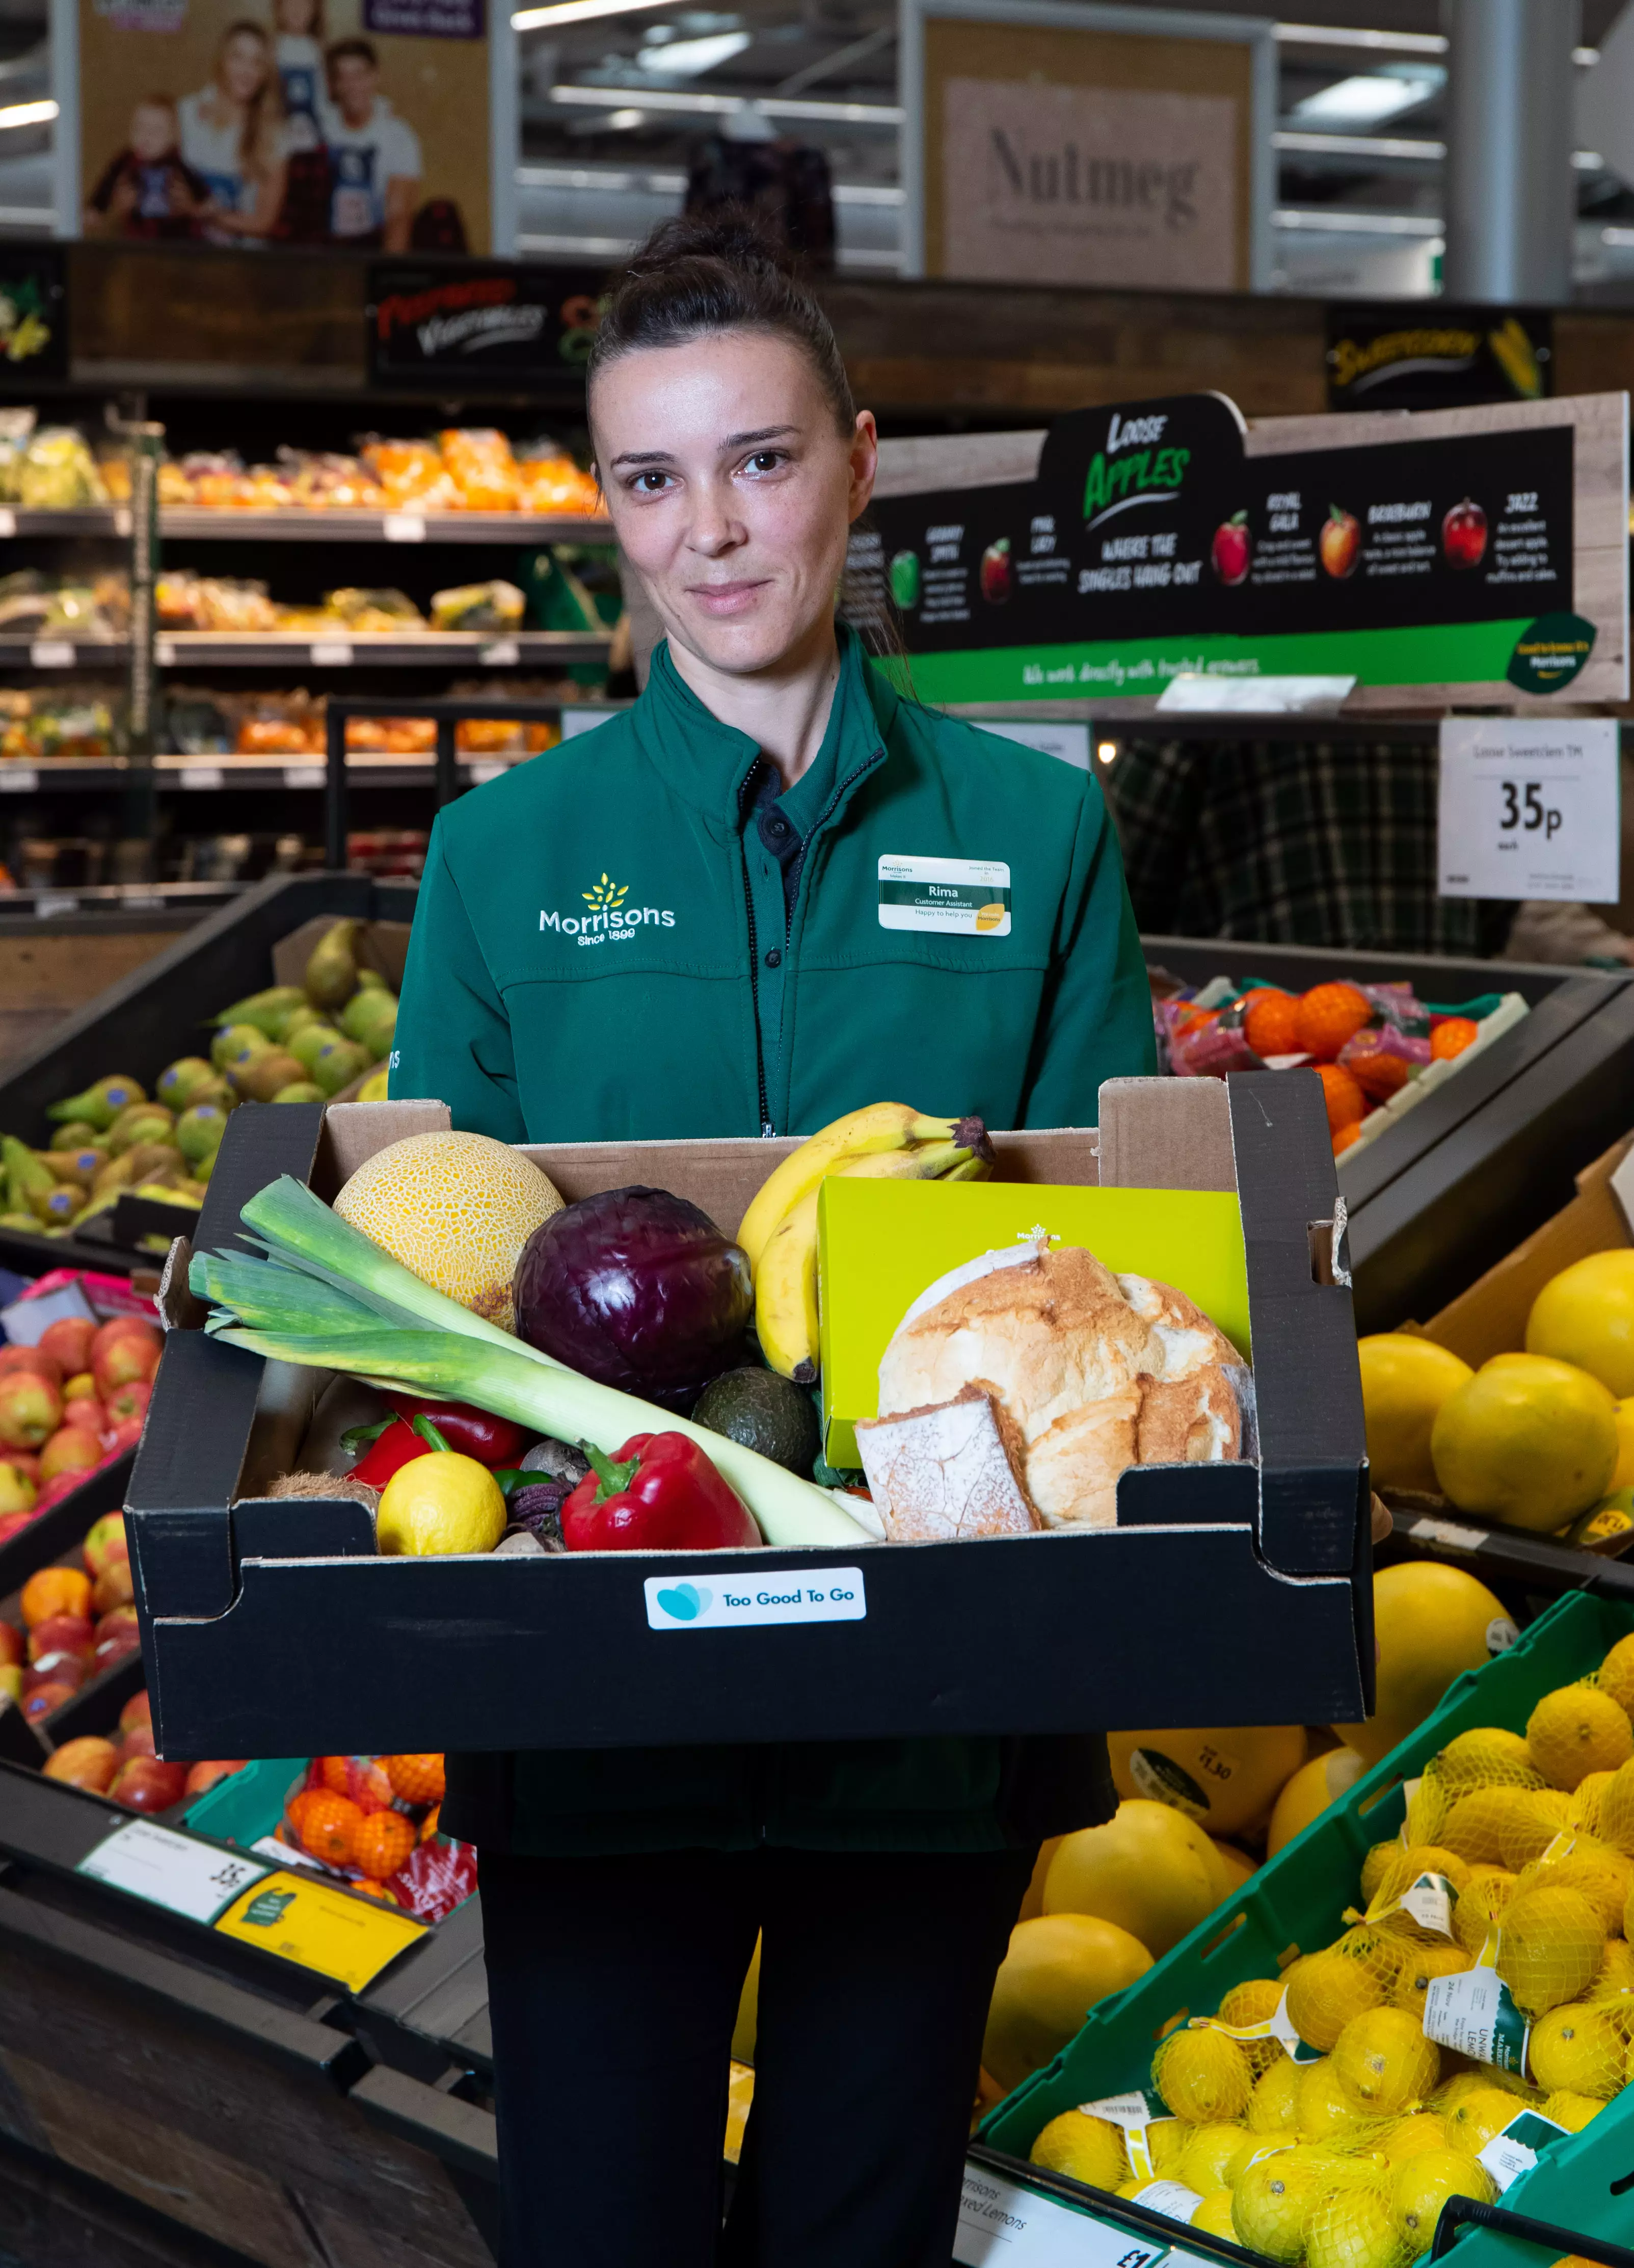 Morrisons will be providing the service from tomorrow.